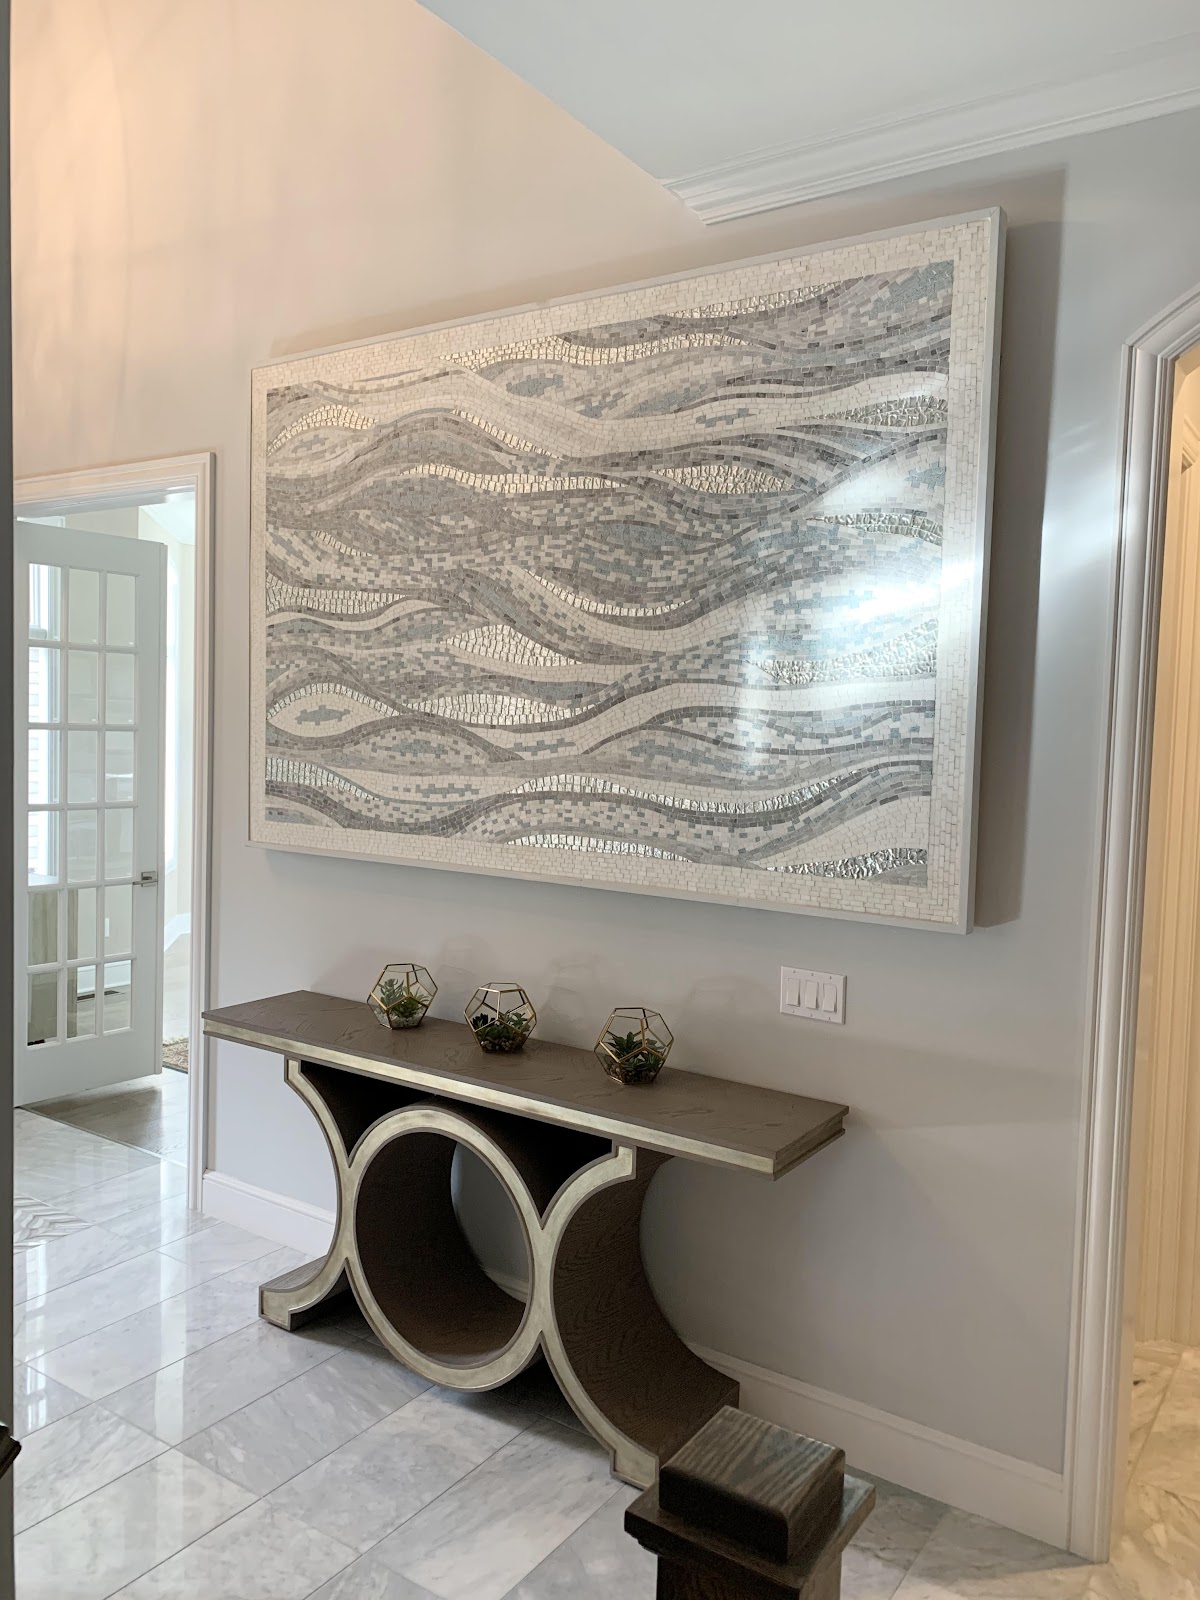 PELOPONNESE WAVES - ABSTRACT MOSAIC ART by Mozaico